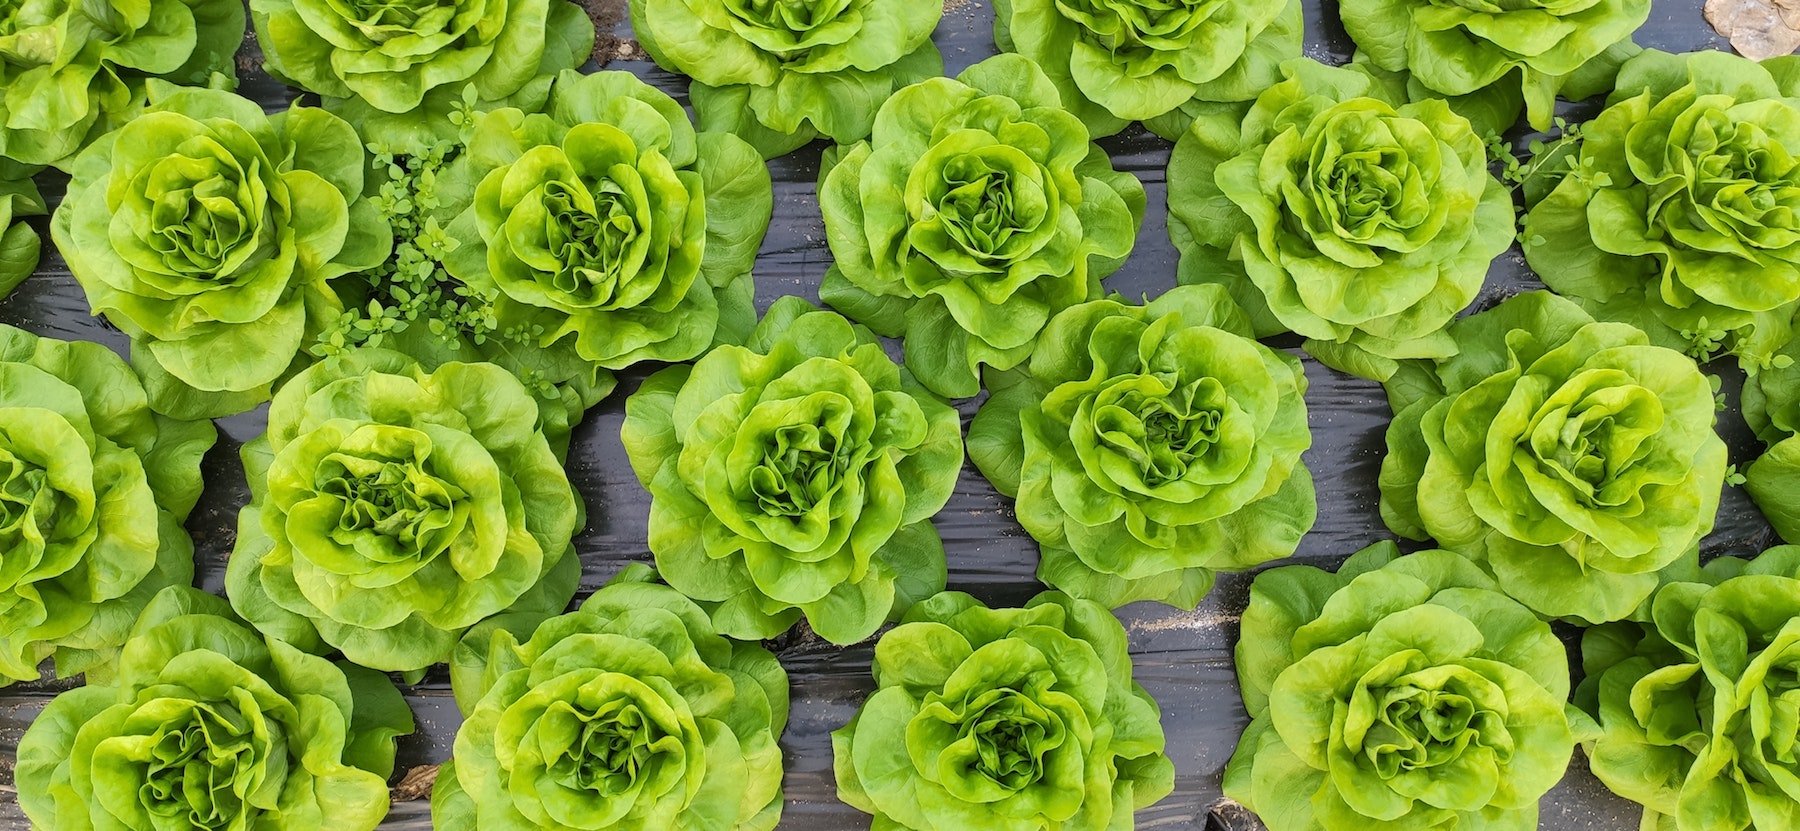 ## When to plant lettuce